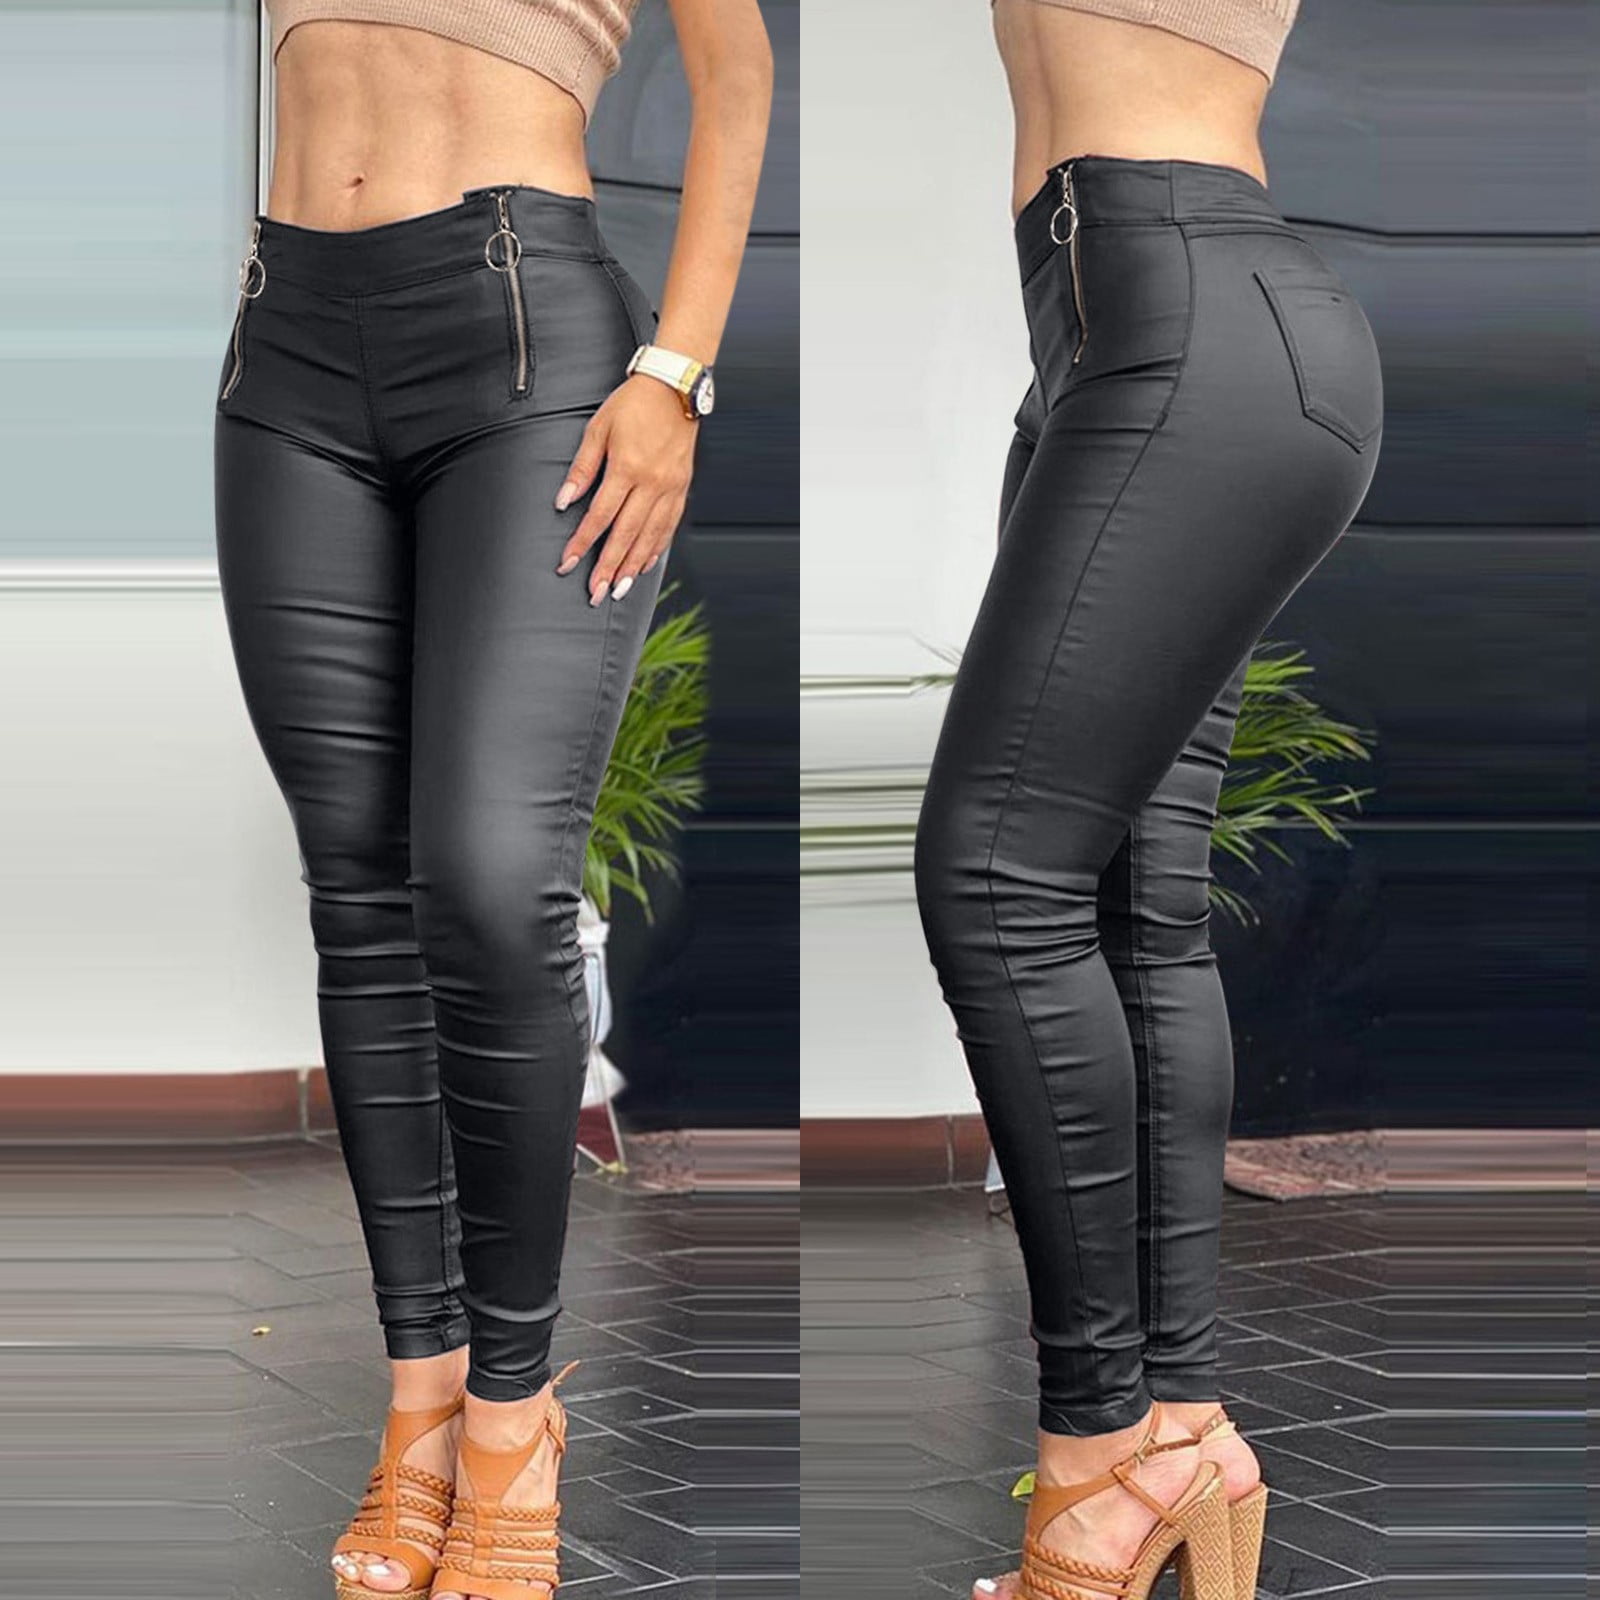 Women's Real Leather High Waisted Trousers Pants